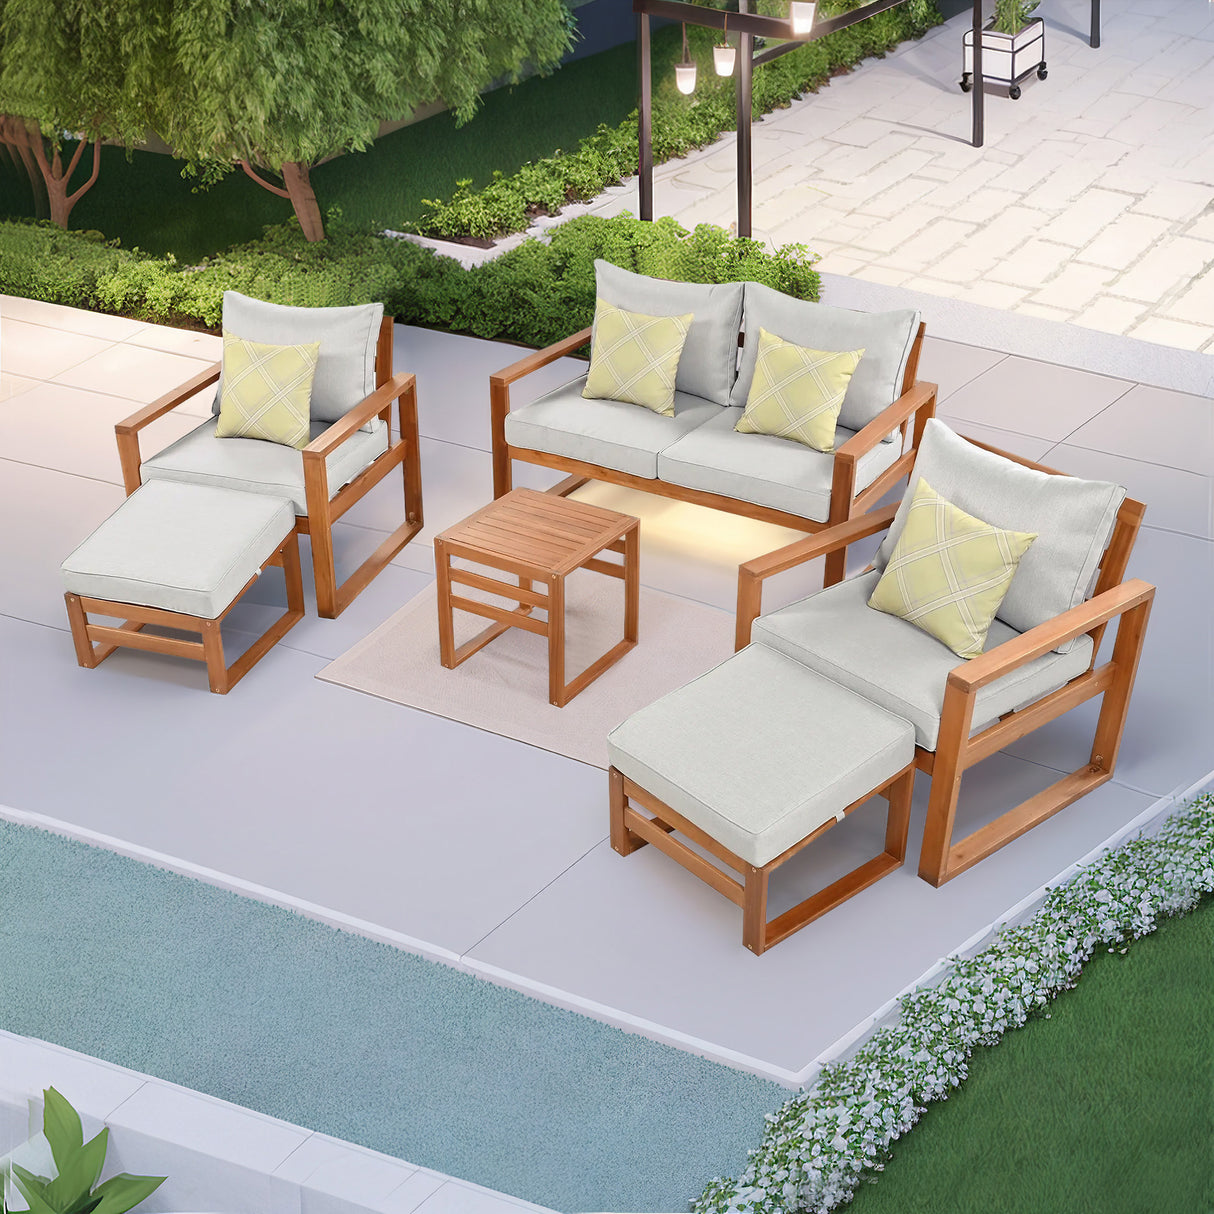 TOPMAX Outdoor Patio Wood 6-Piece Conversation Set, Sectional Garden Seating Groups Chat Set with Ottomans and Cushions for Backyard, Poolside, Balcony, Grey - Home Elegance USA